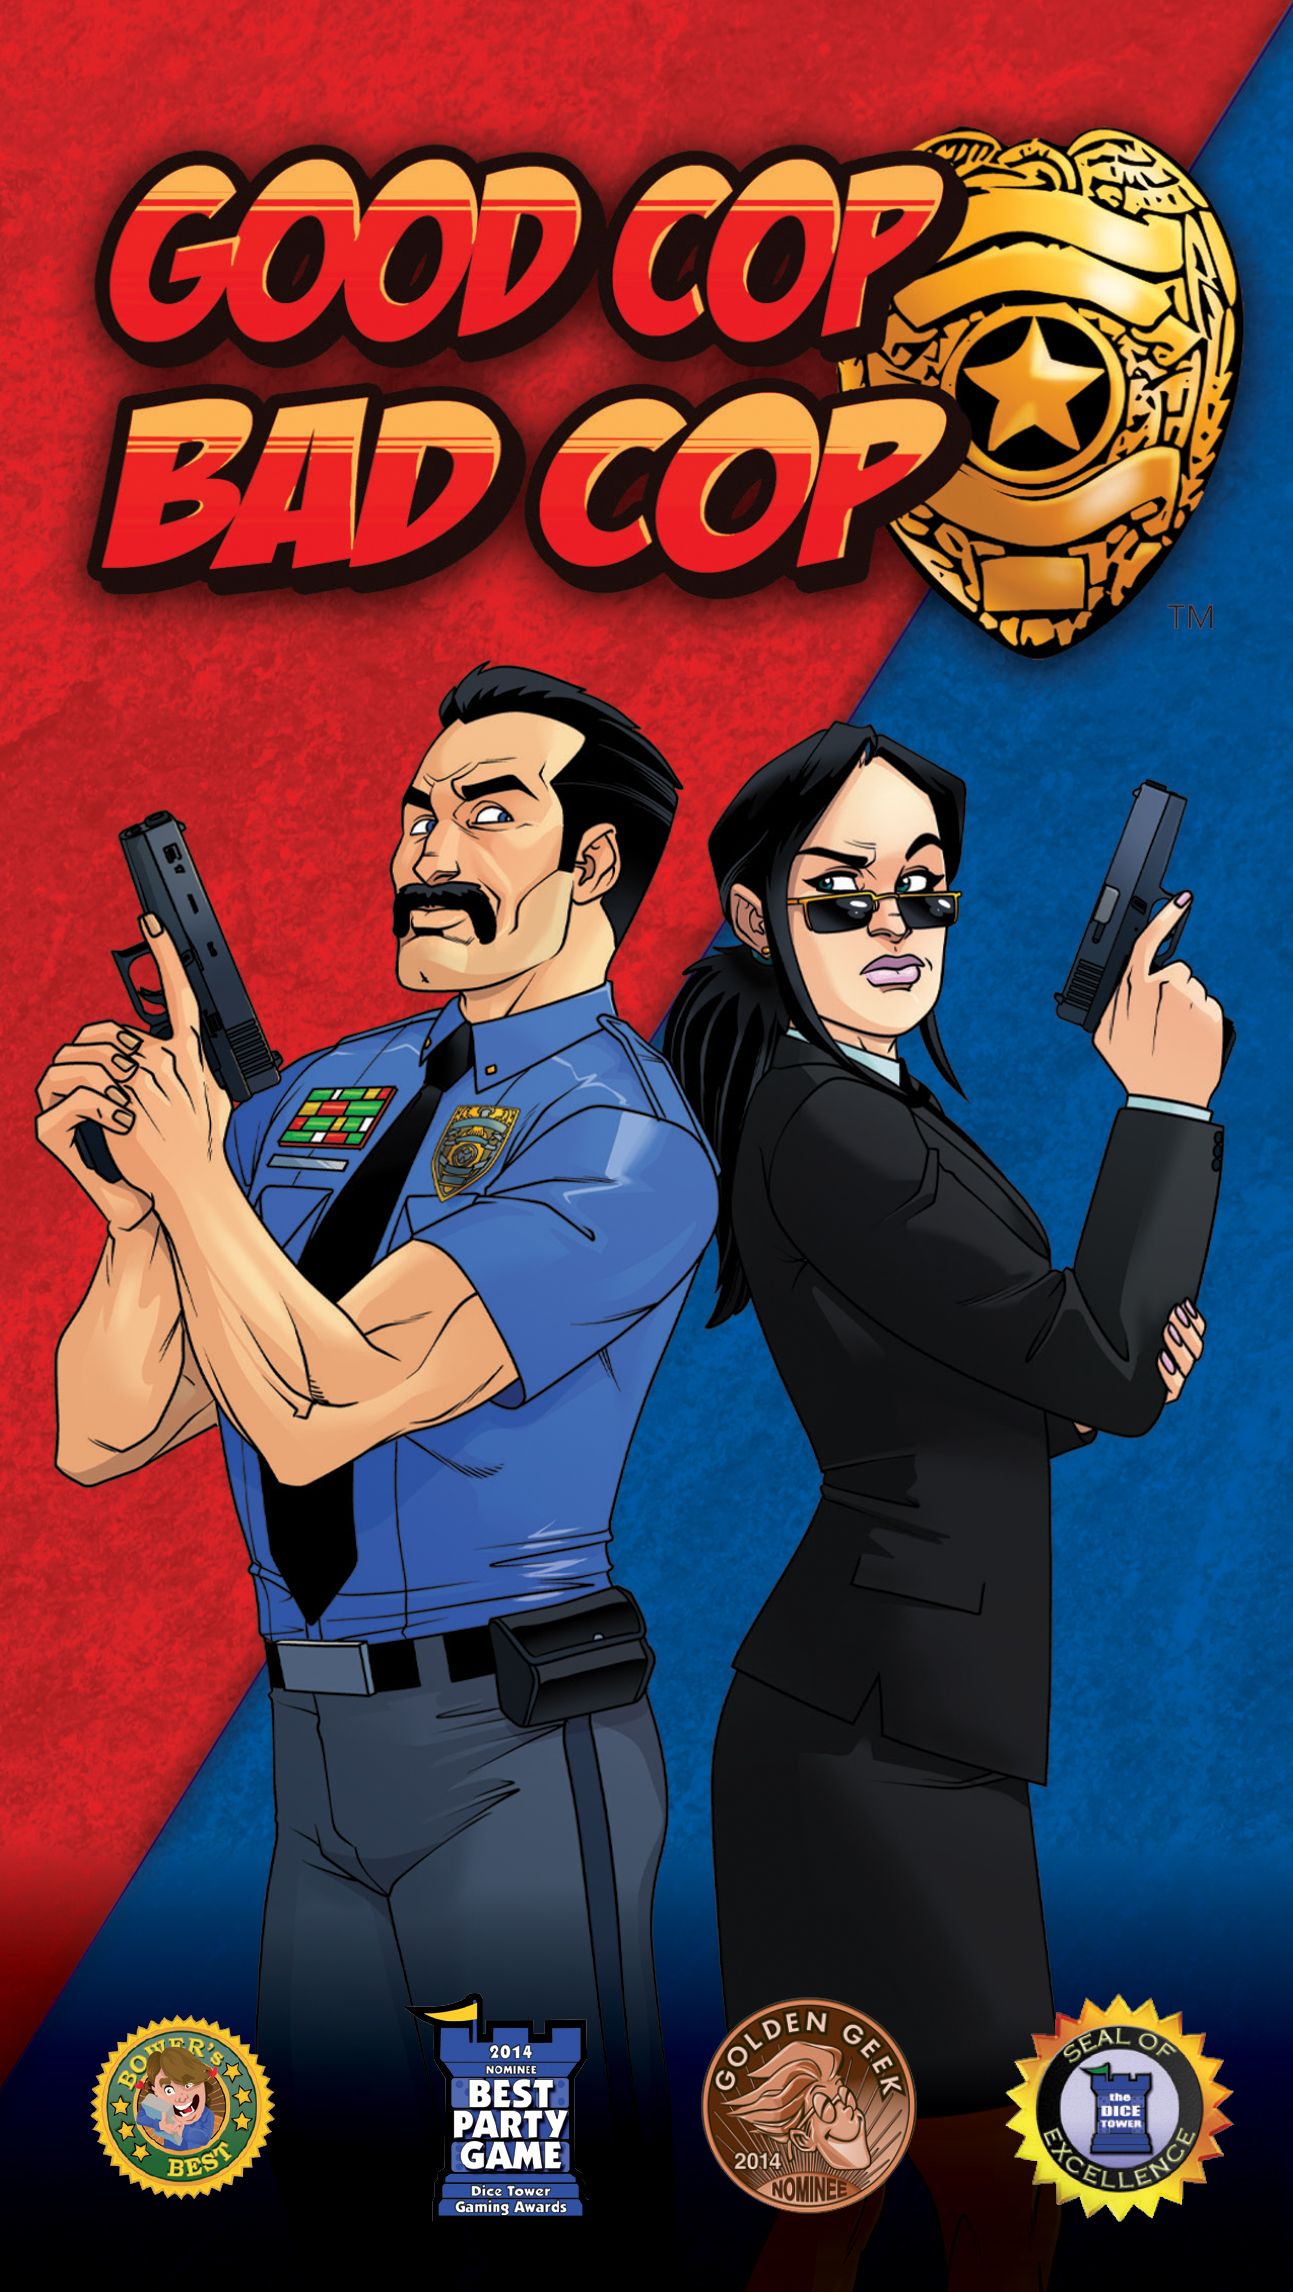 good-cop-bad-cop-third-edition-promoted-expansion-ks-crowdfinder